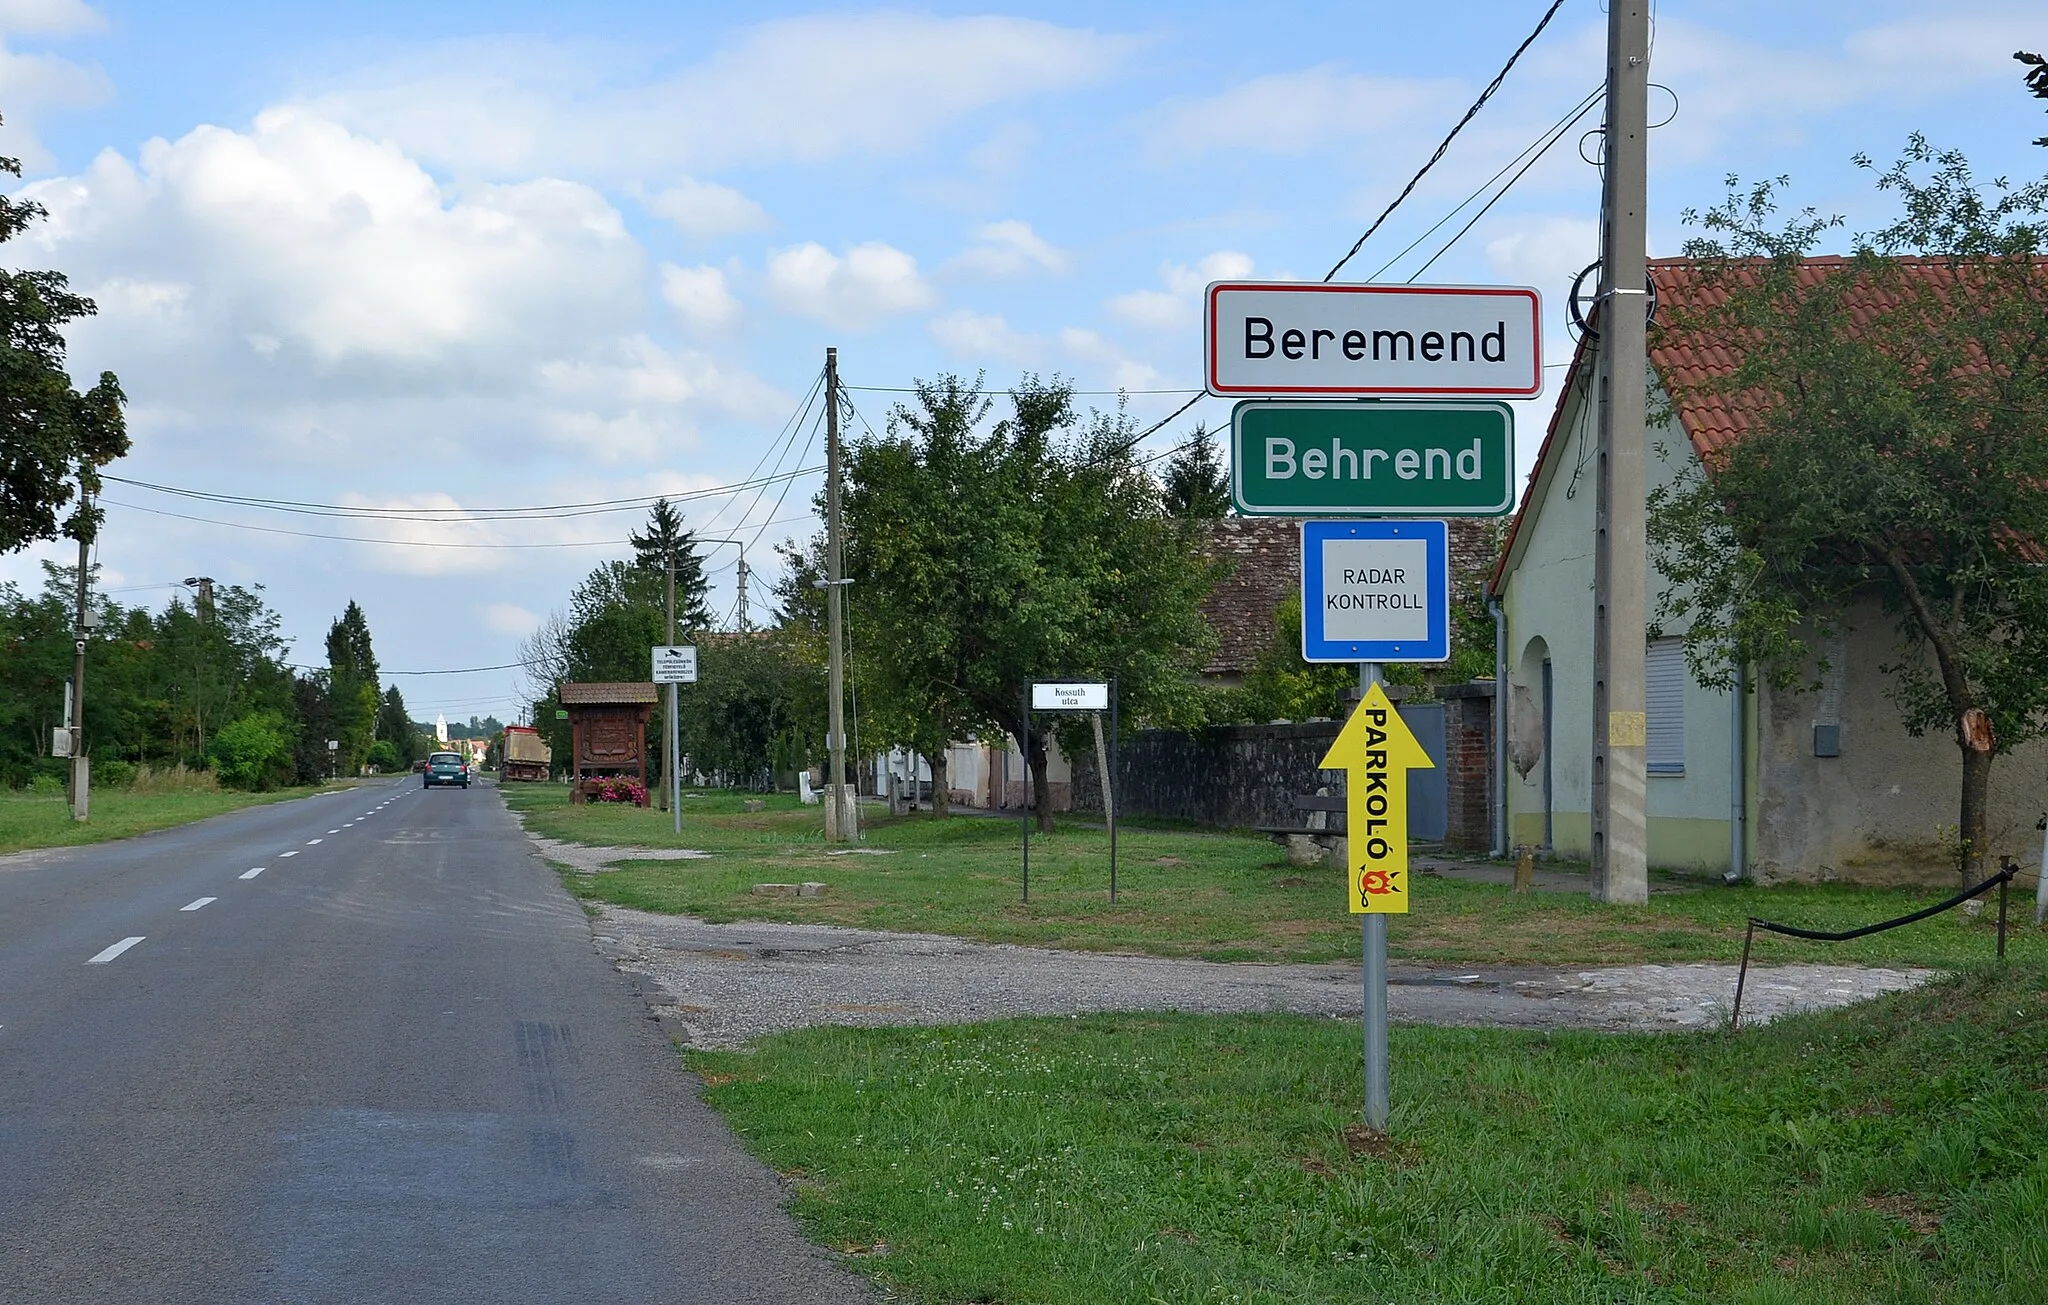 Photo showing: Beremend (Behrend), village in Hungary